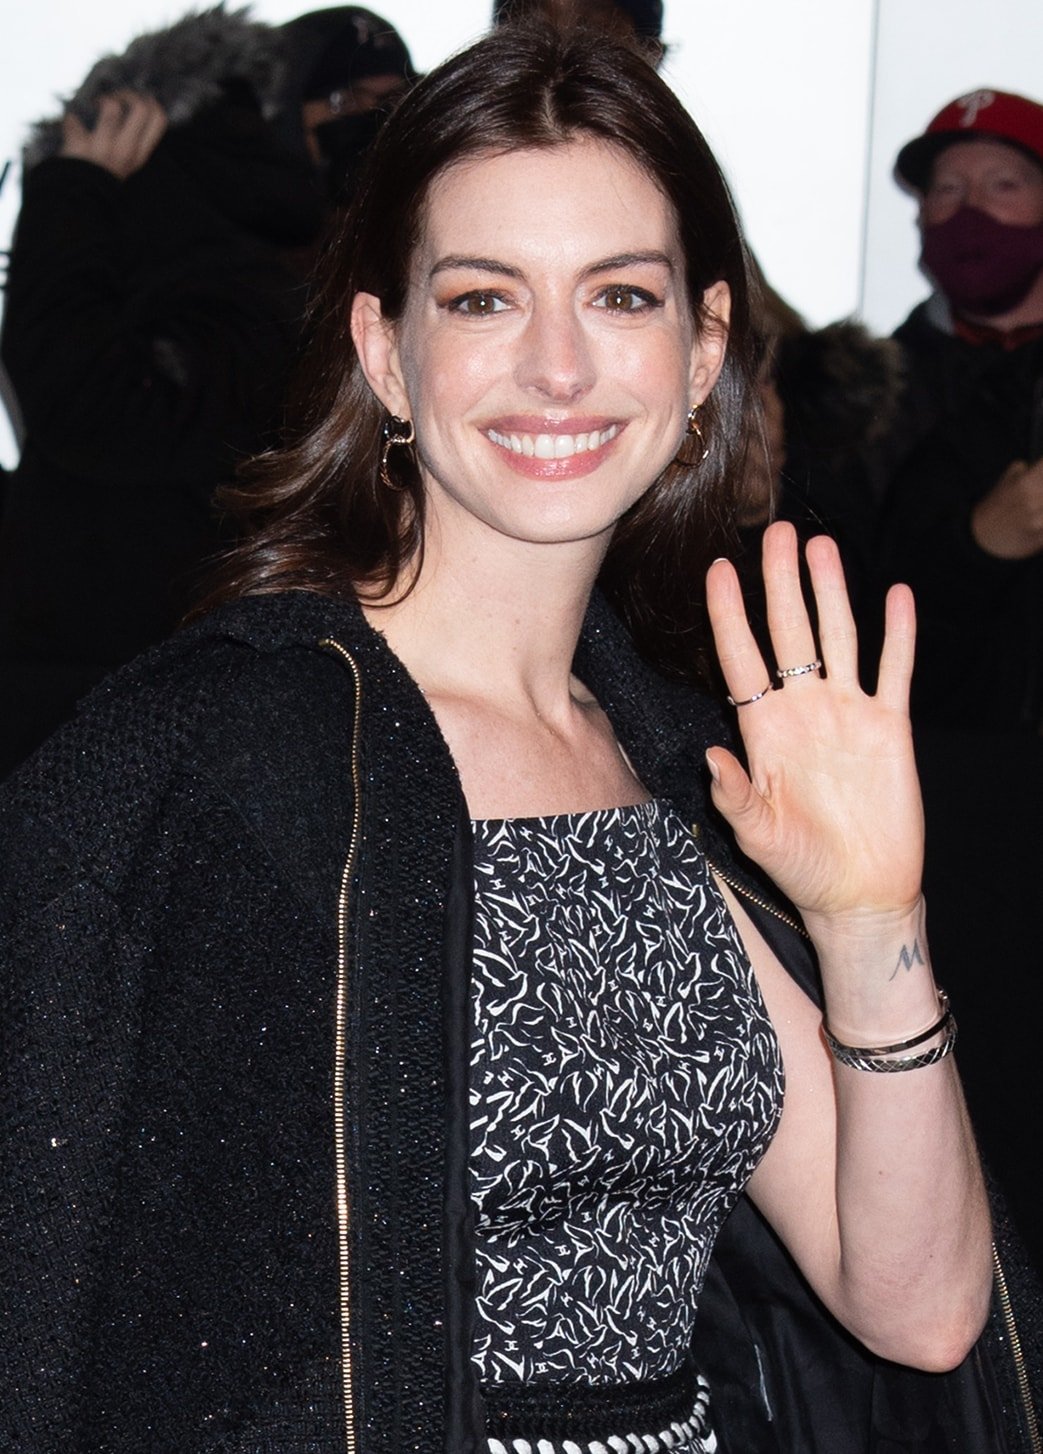 Anne Hathaway highlights her eyes with mascara and eyeshadow and wears her brunette tresses down in natural waves